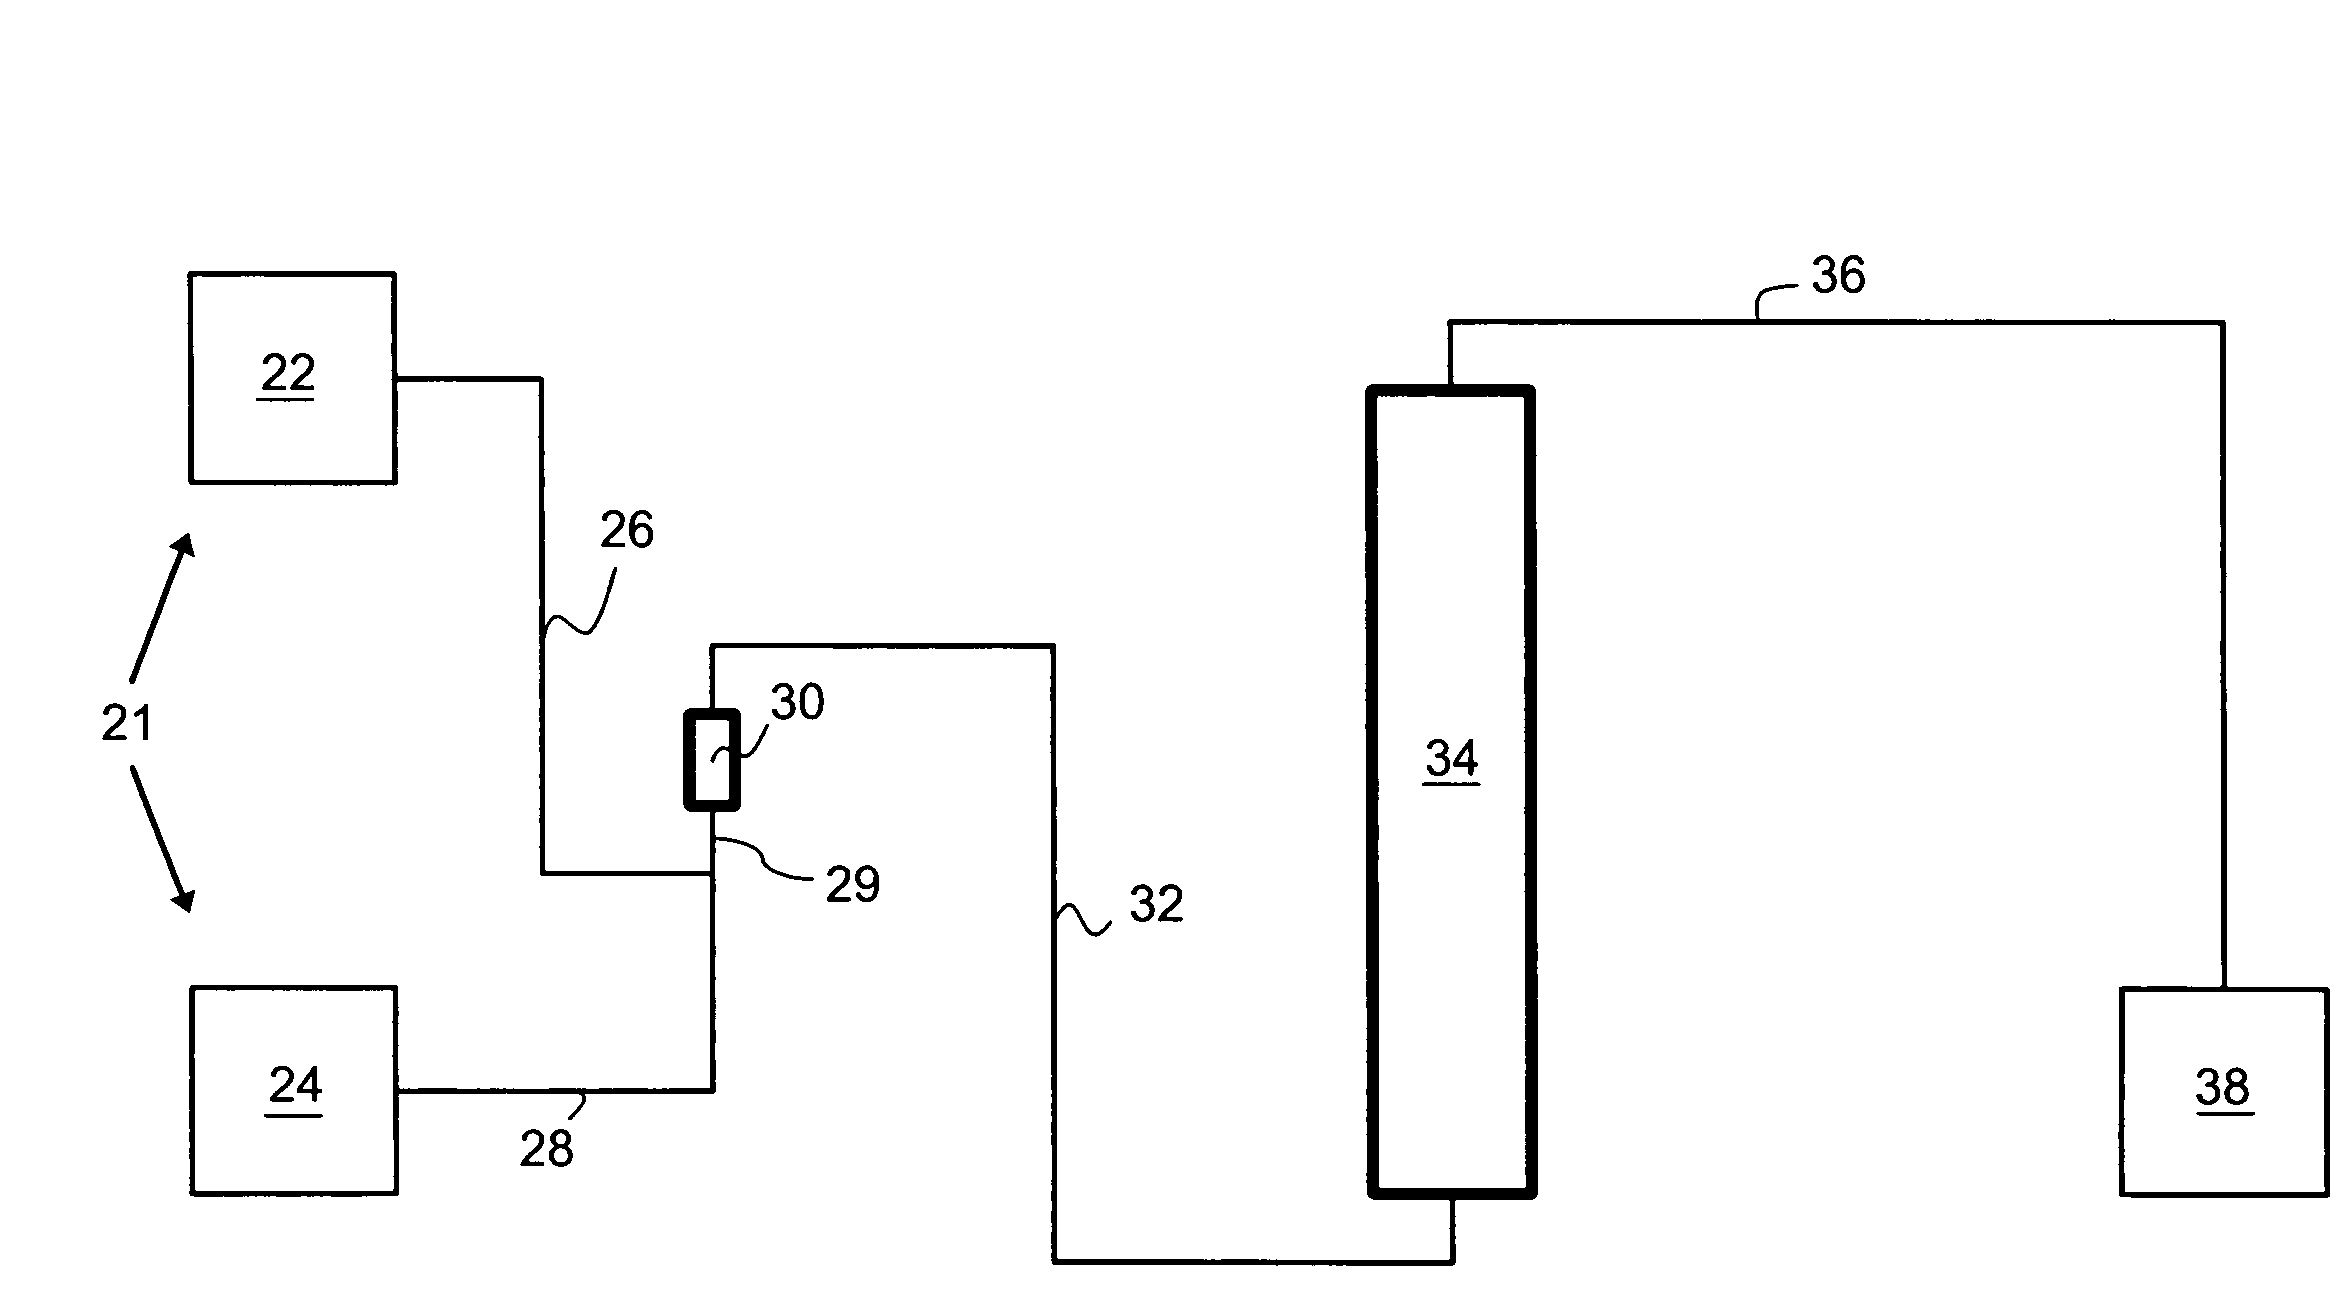 Apparatus and method for making a peroxycarboxylic acid